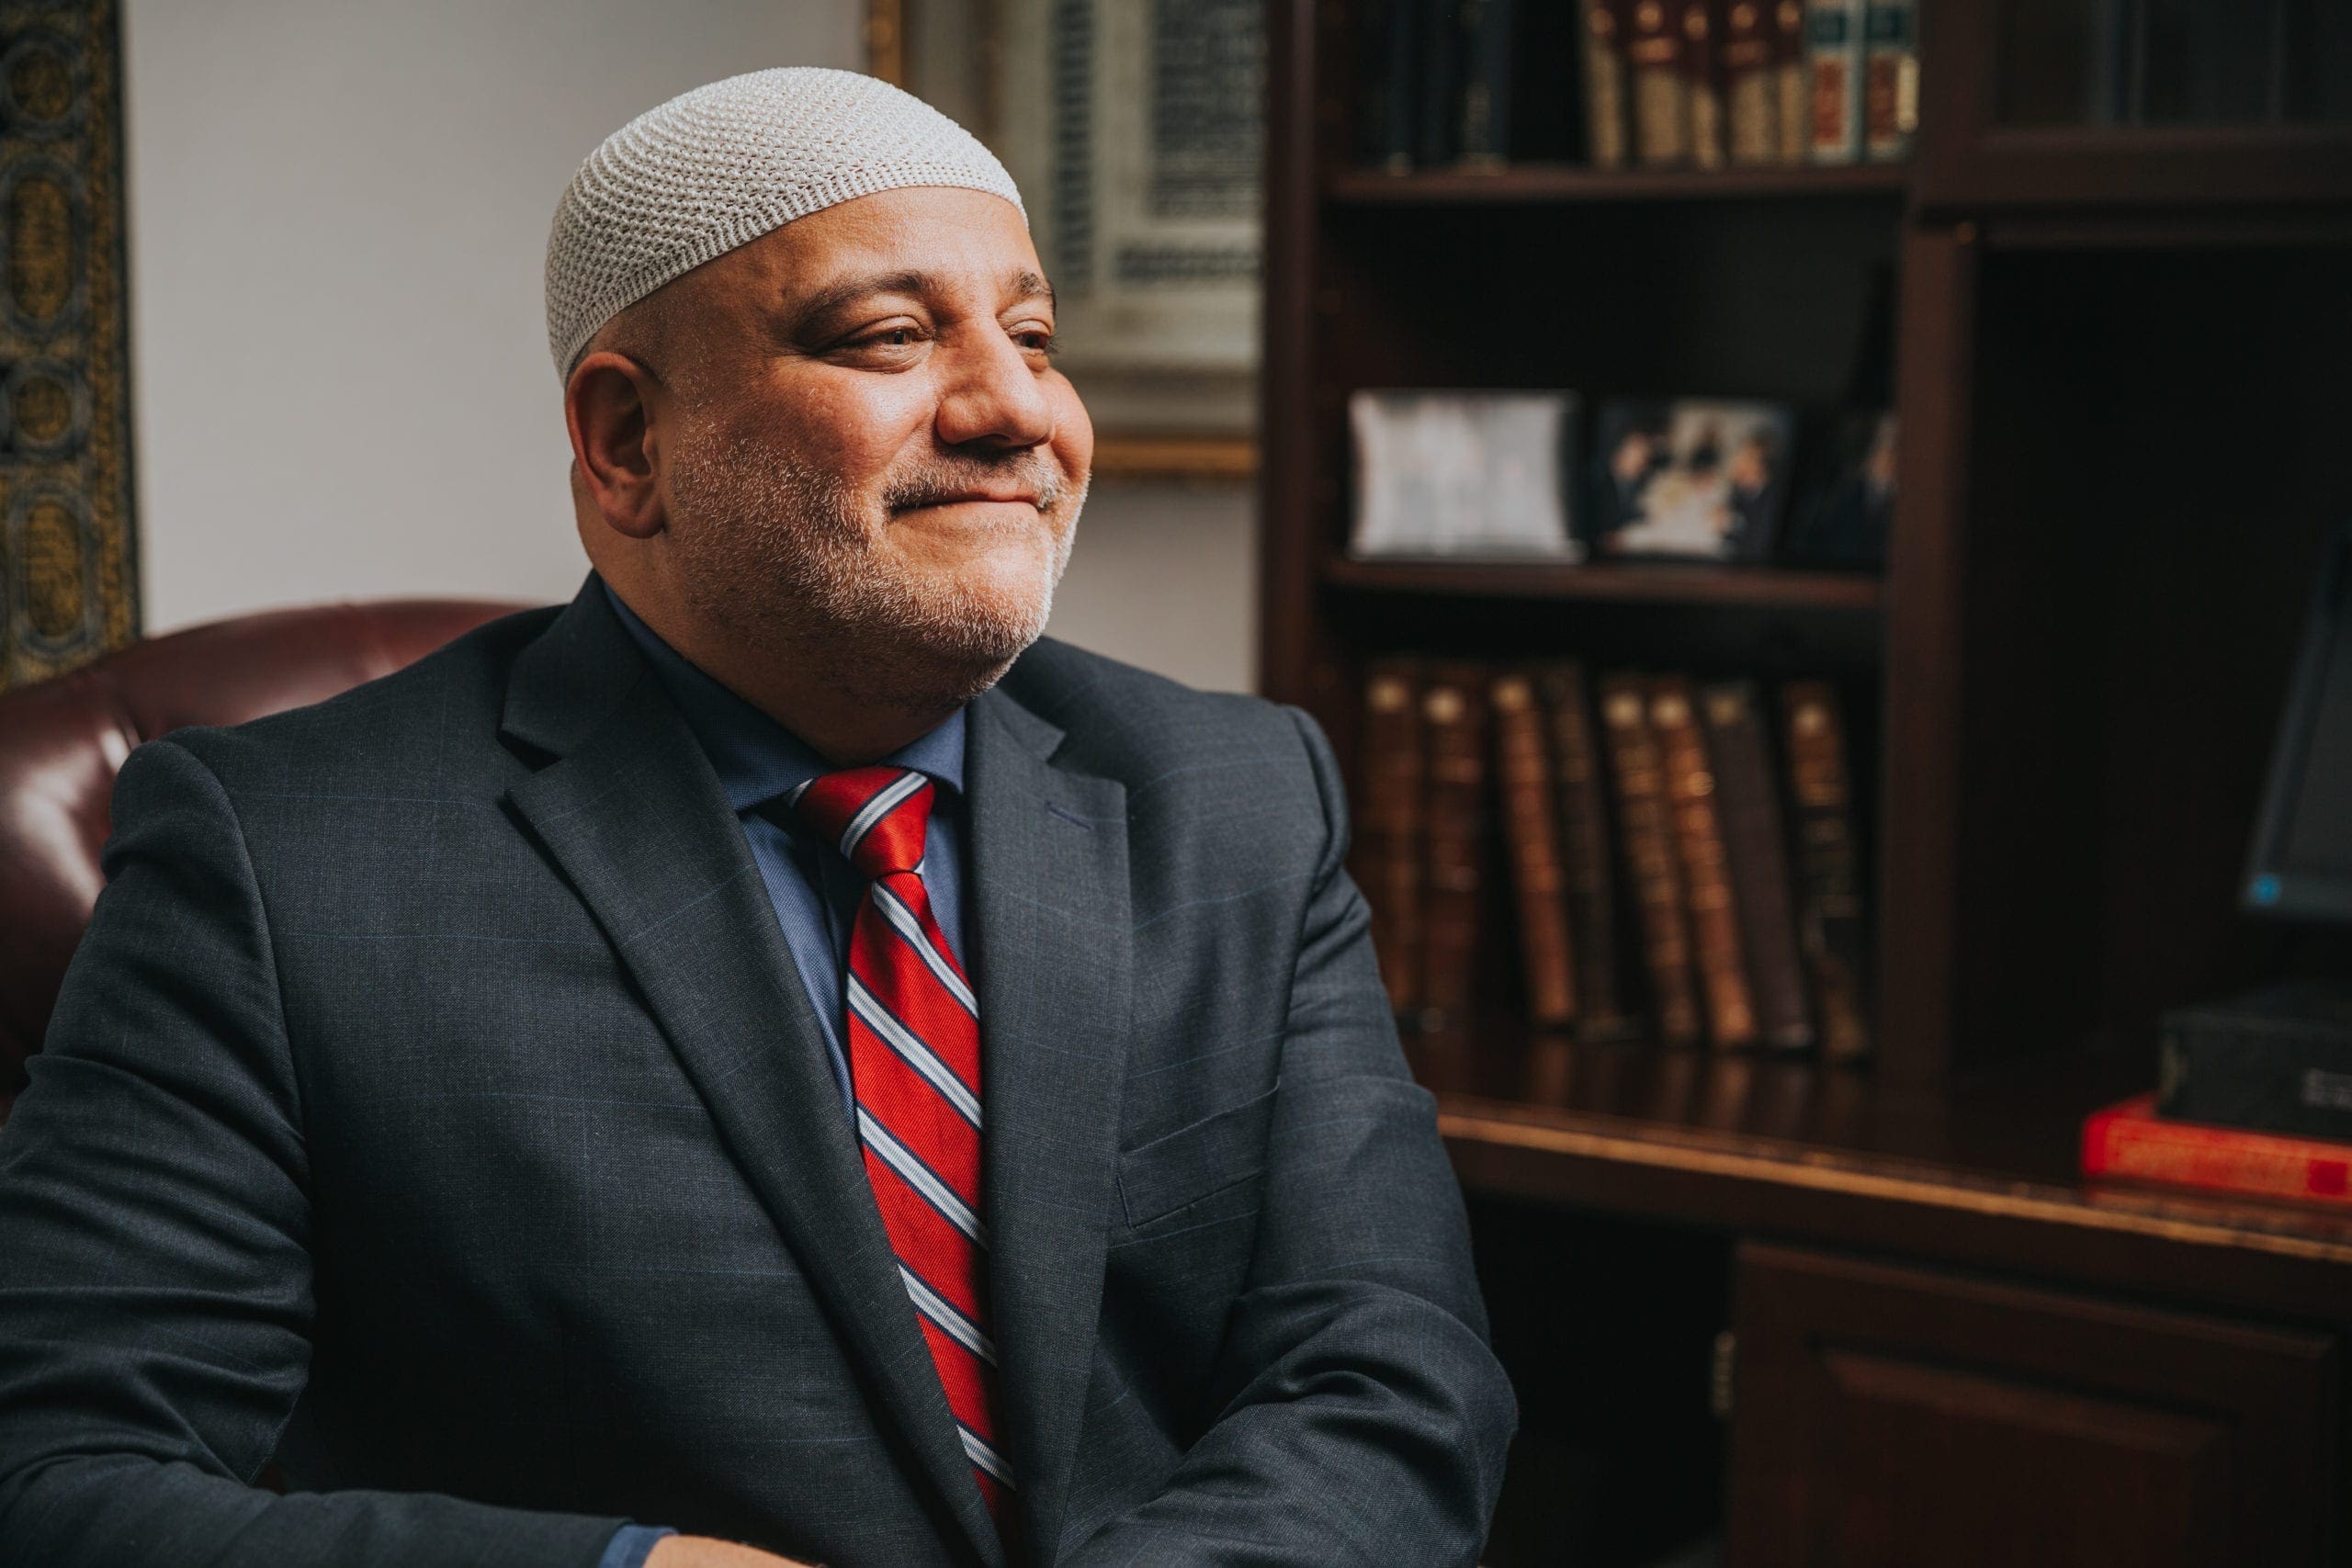 Humor, hope and mercy fill the pages of an American imam’s life story